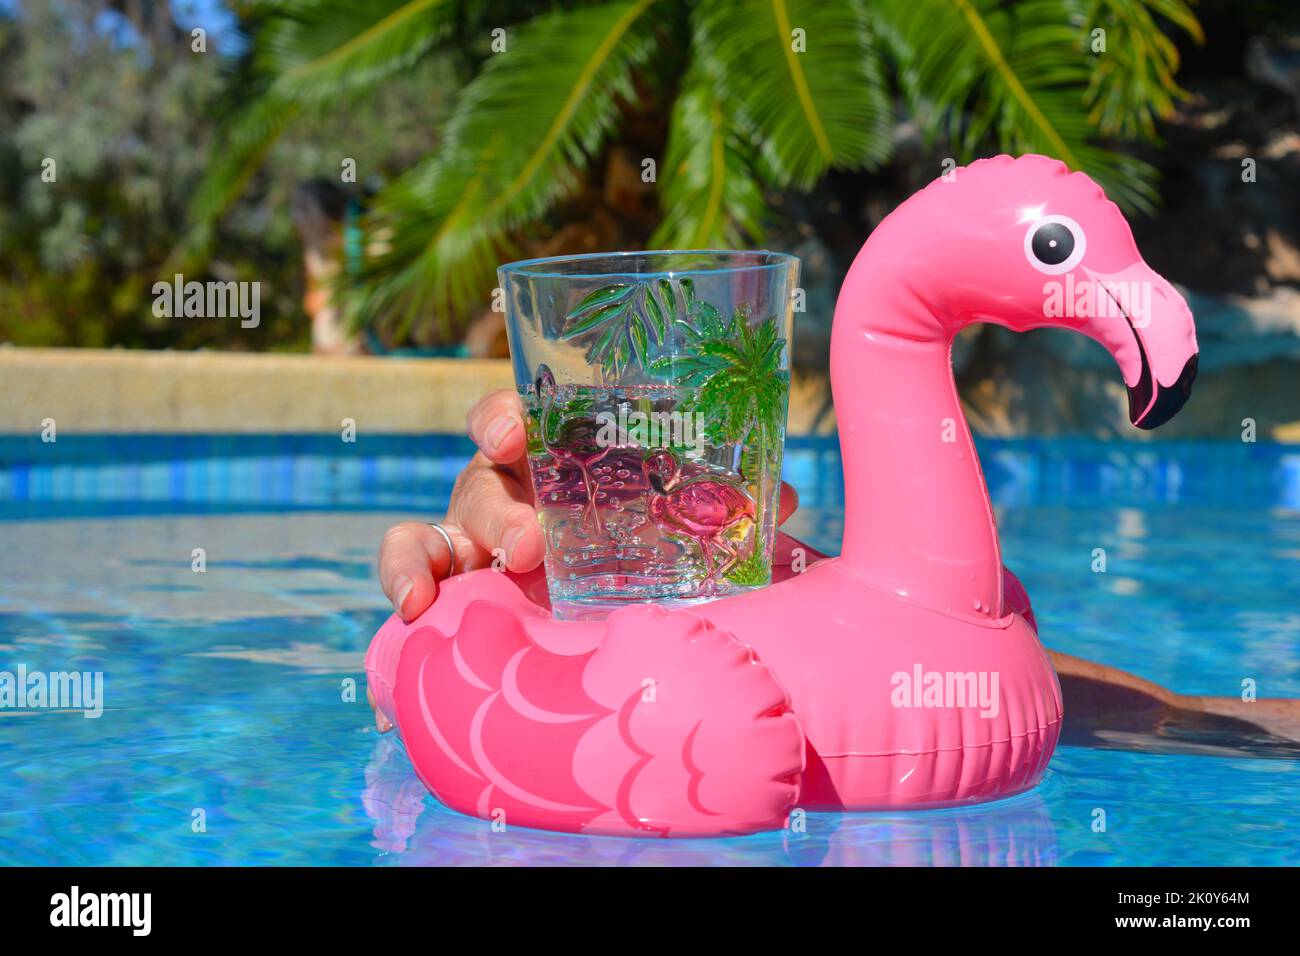 Refreshing drink in woman's hand, in bright pink flamingo glass and holder floating in swimming pool Stock Photo